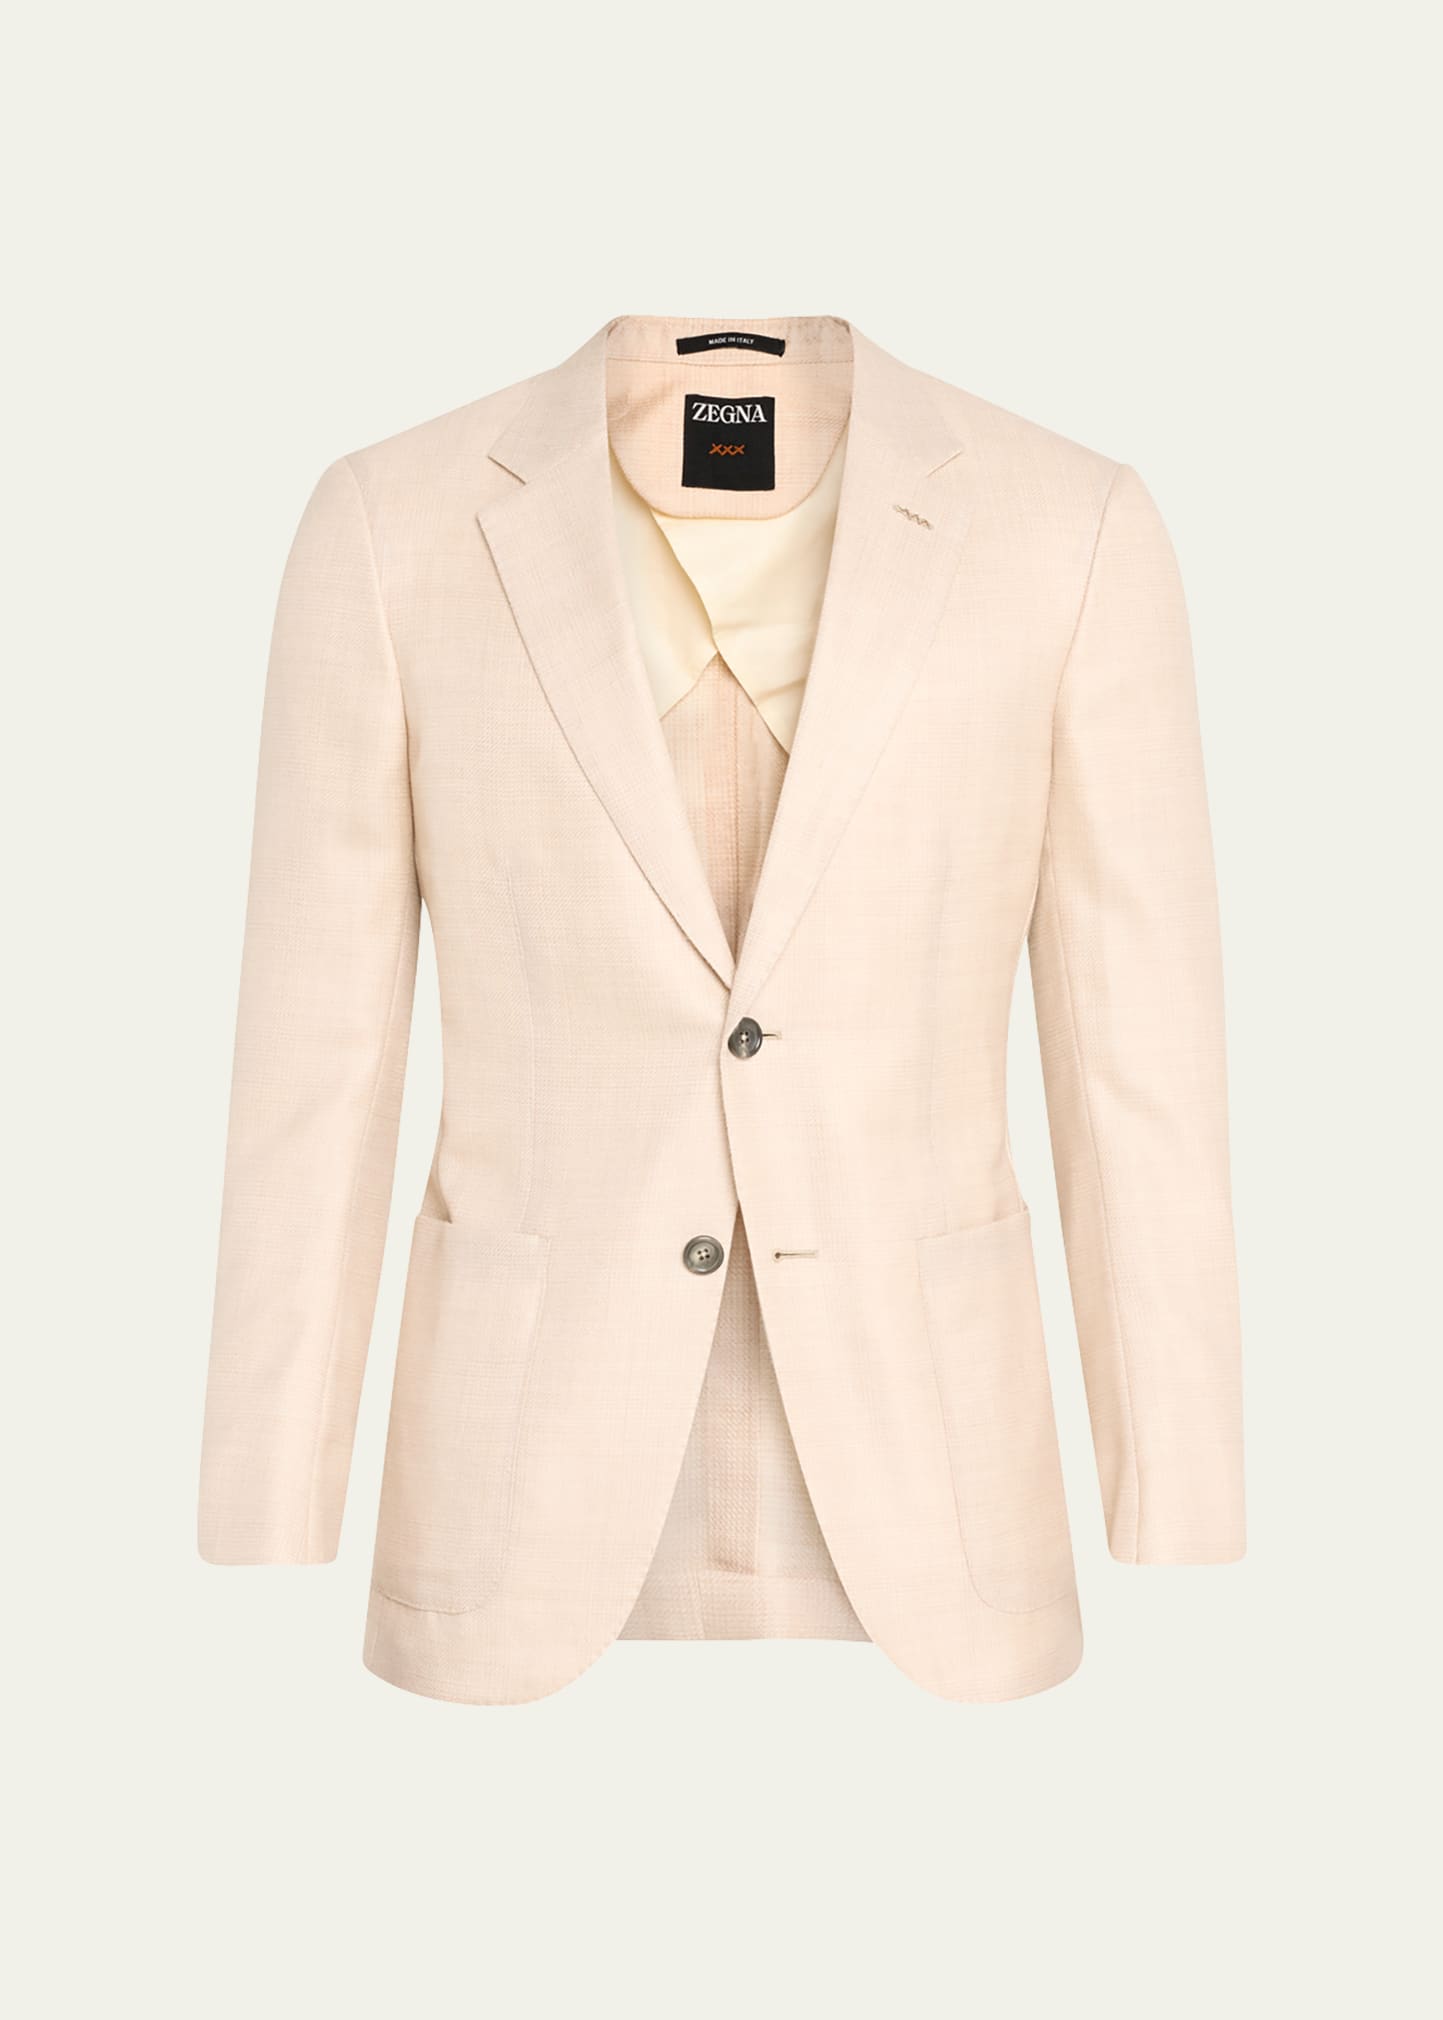 Men's Cashmere and Silk Tailoring Jacket